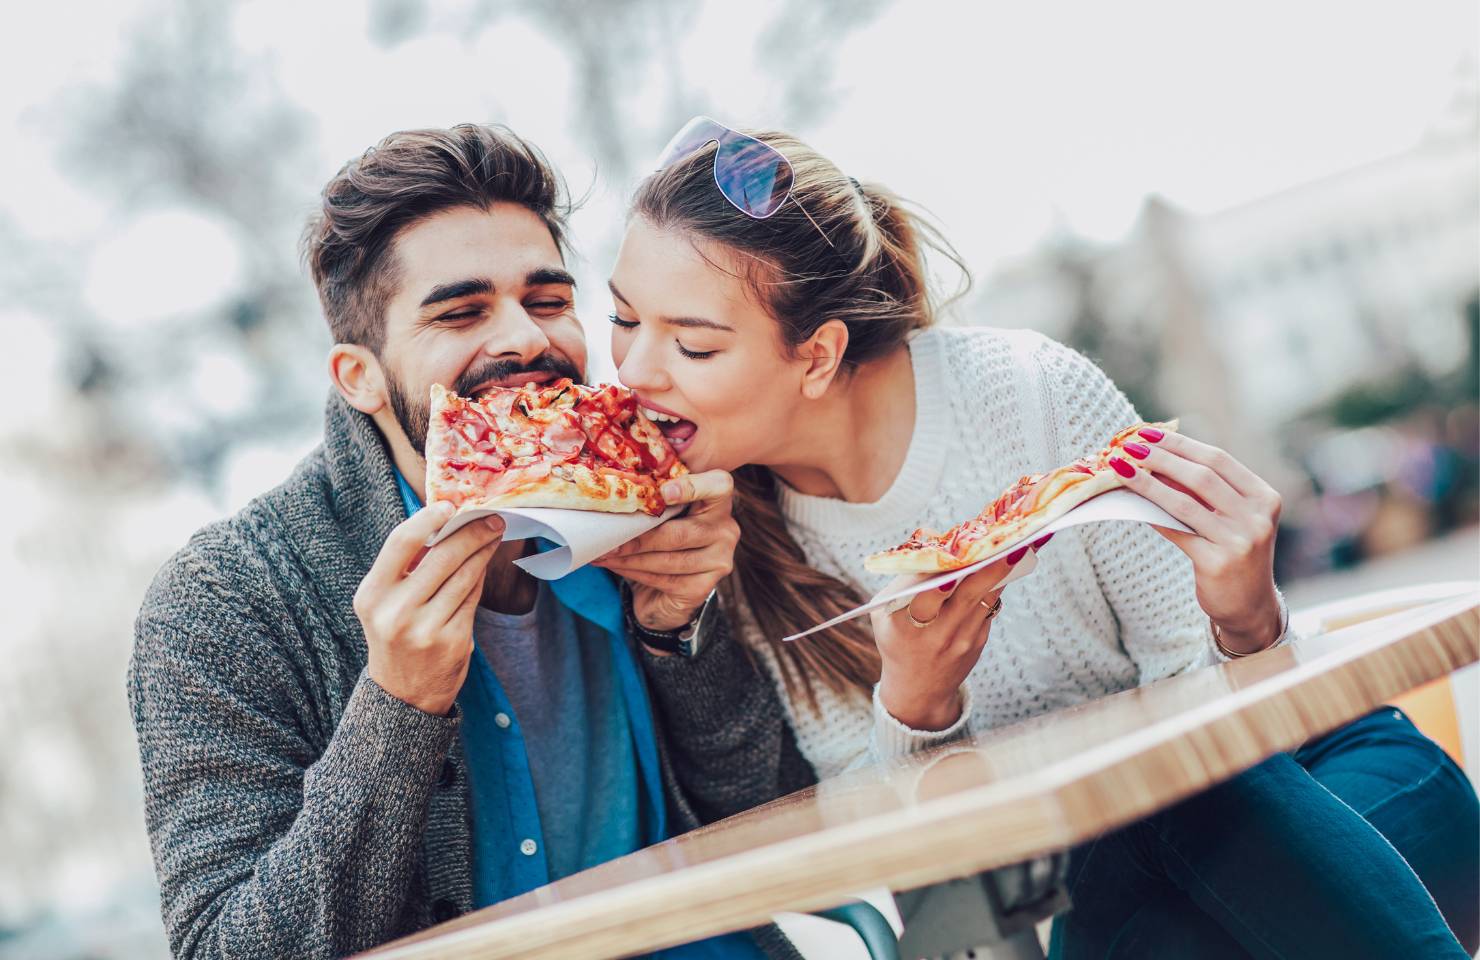 A couple share pizza in Italy